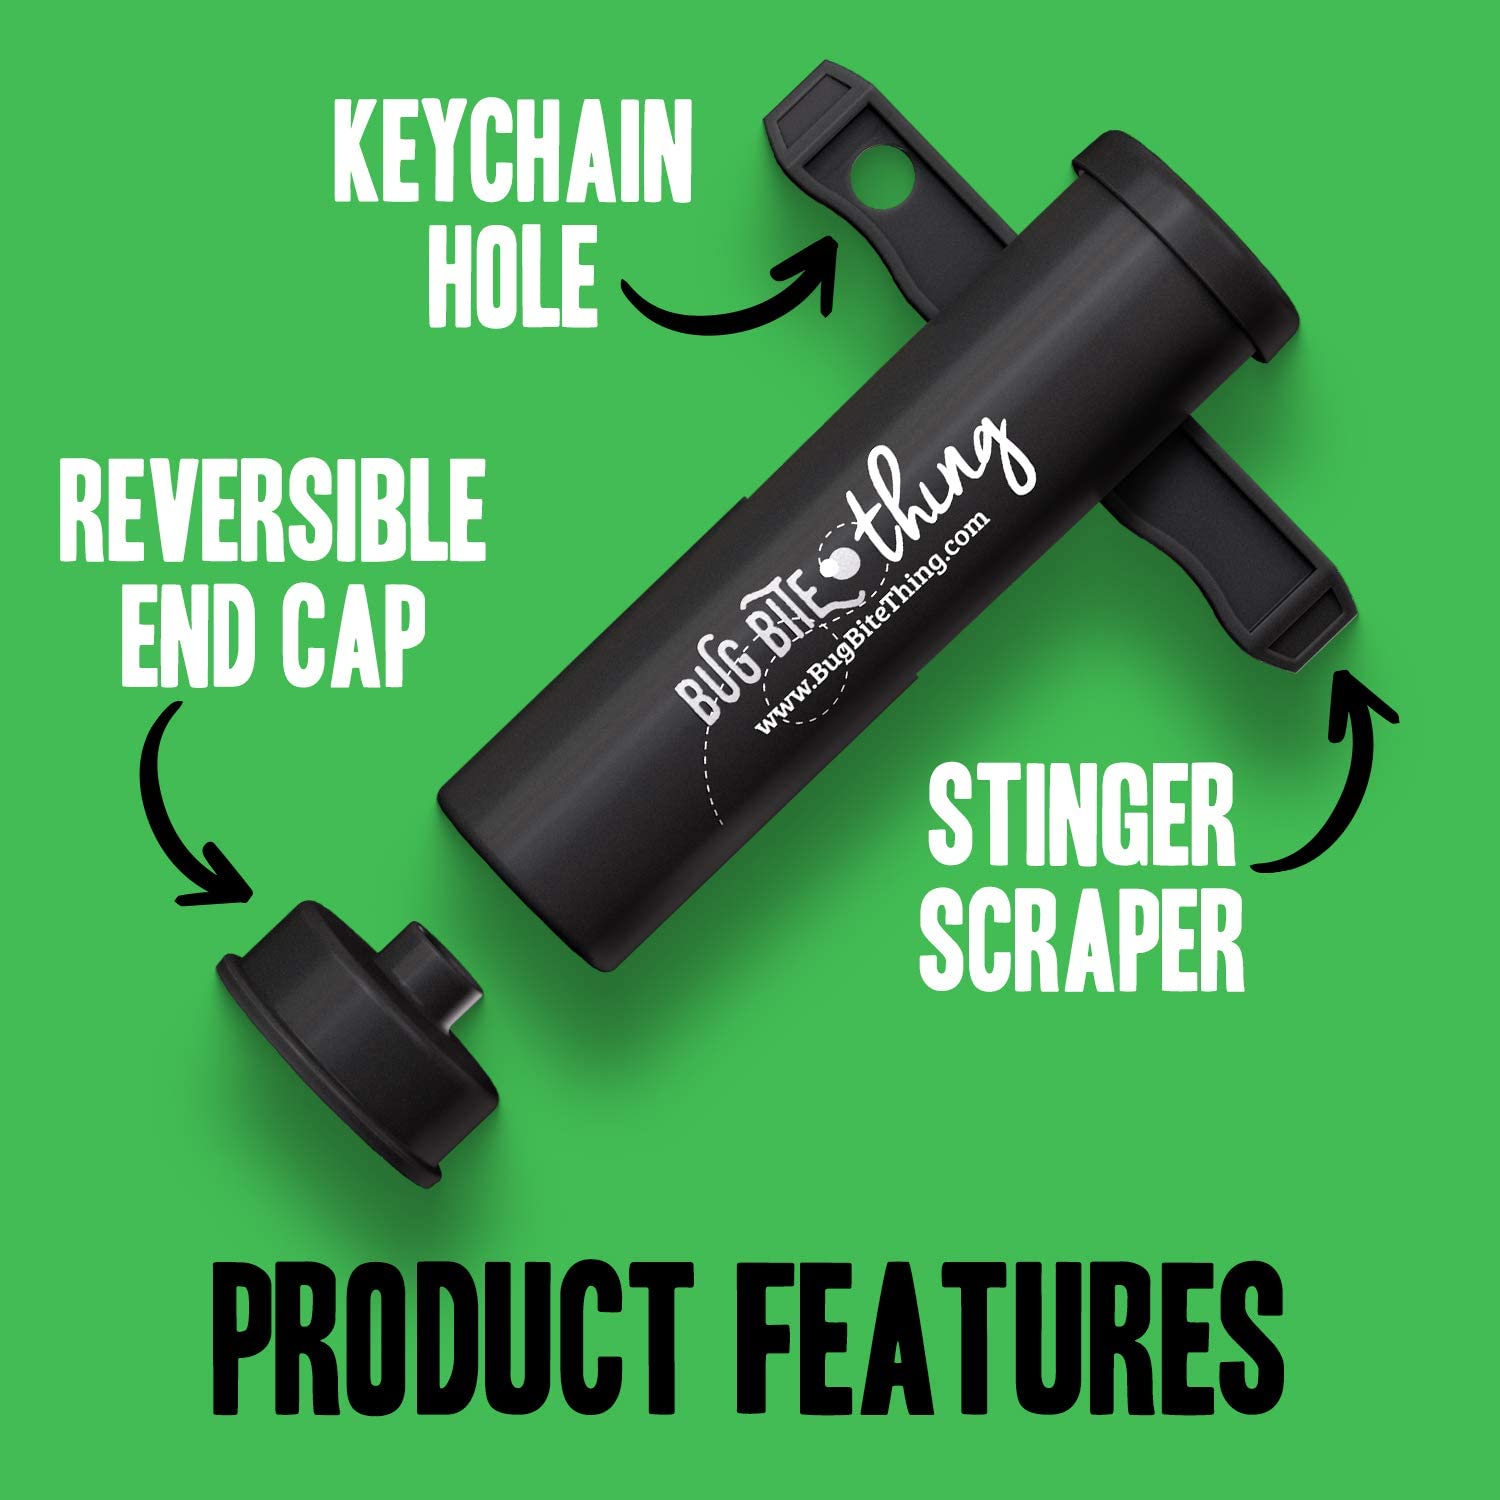 Product details about a gadget called Big Bite Thing. There is text around the gadget which says, 'Keychain hole, stinger scraper, reversible end cap.'